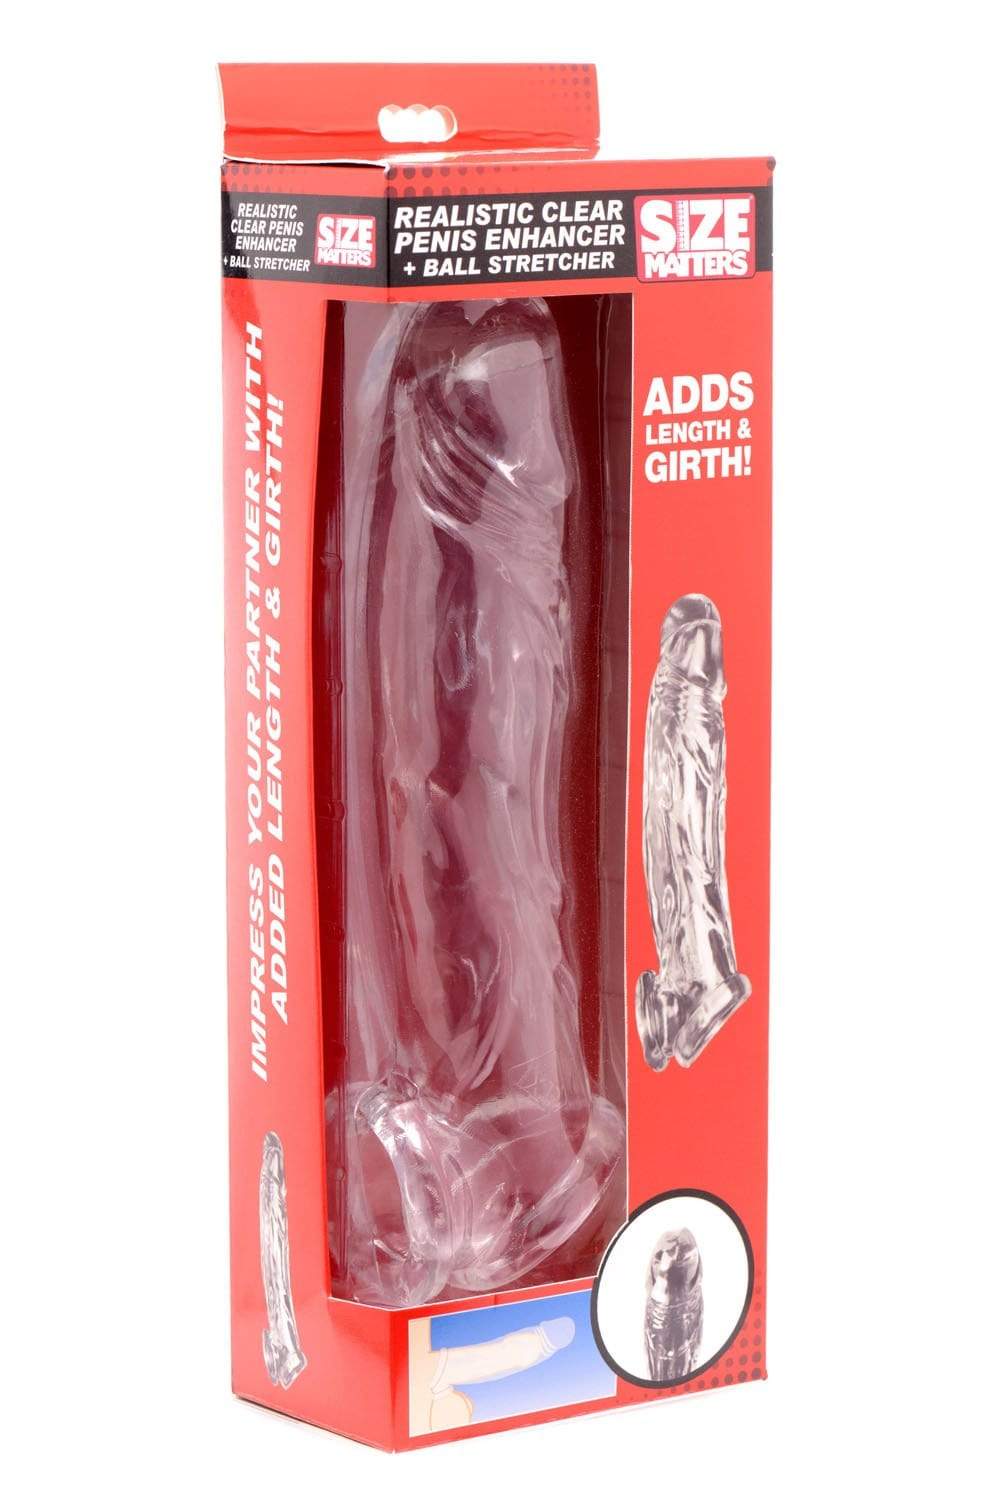 realistic clear penis enhancer and ball stretcher